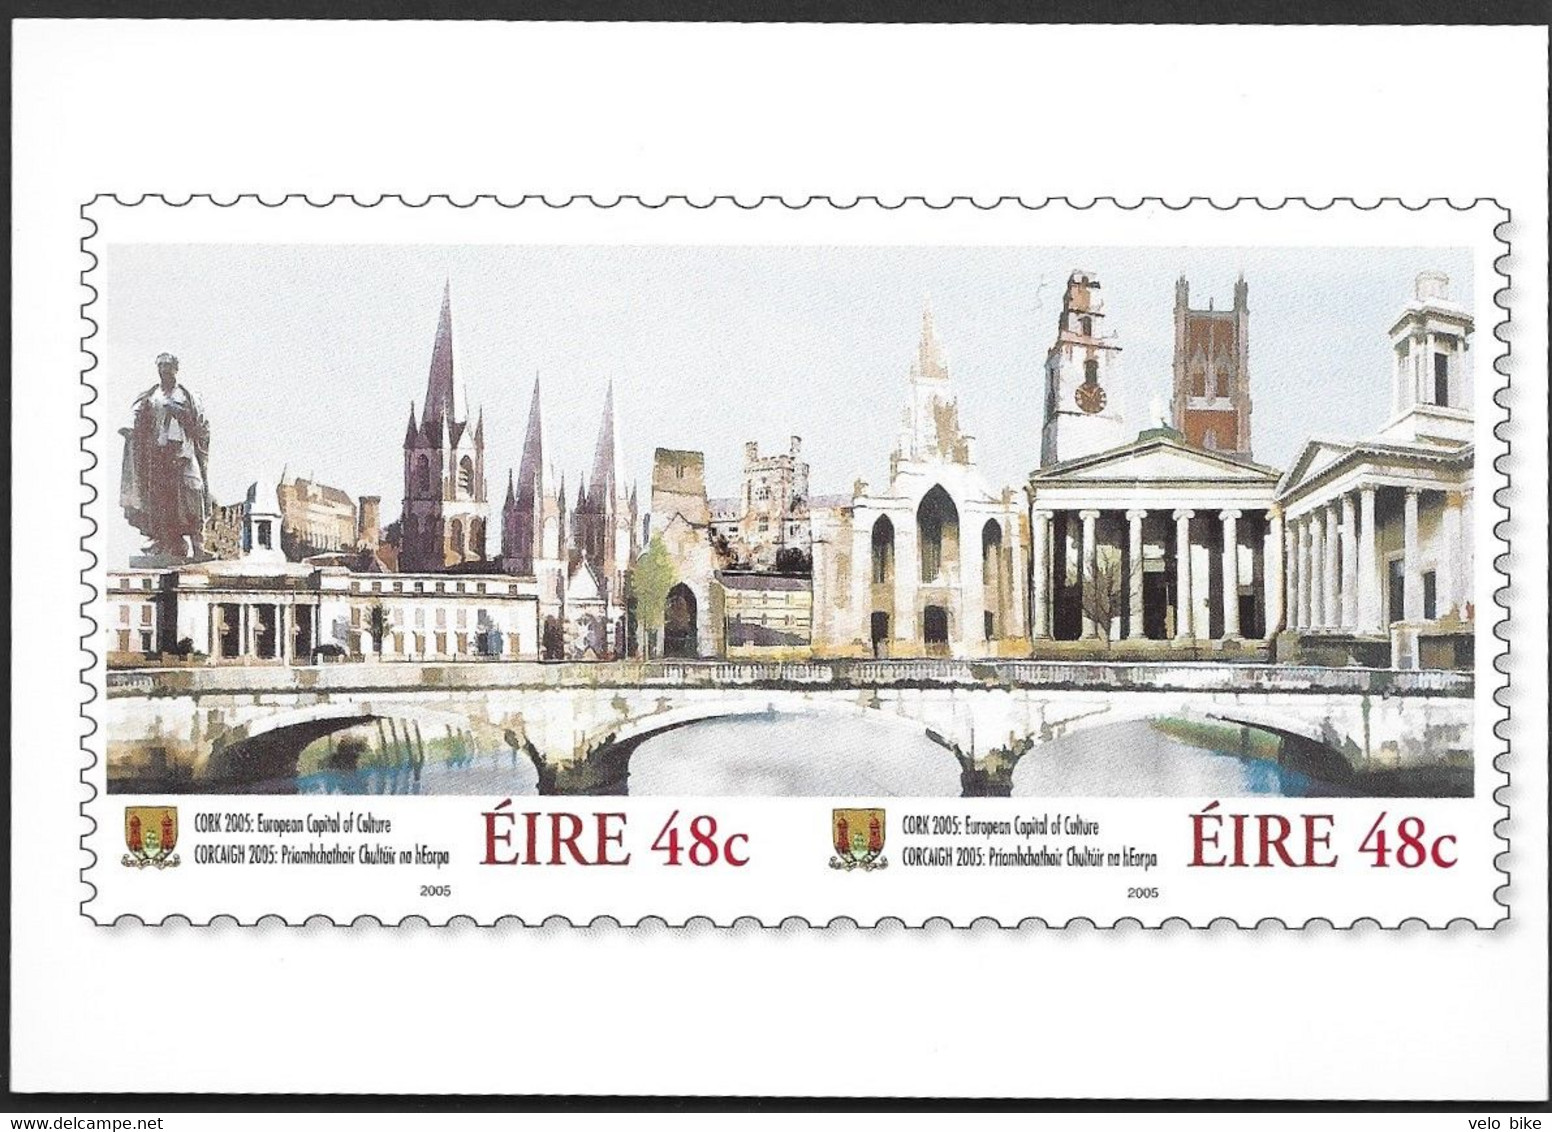 Eire Ireland Postal Stationery Postage Paid Cork 2005 Art Statue Bridge Church Capitol Of Culture Prioritaire Airmail - Entiers Postaux